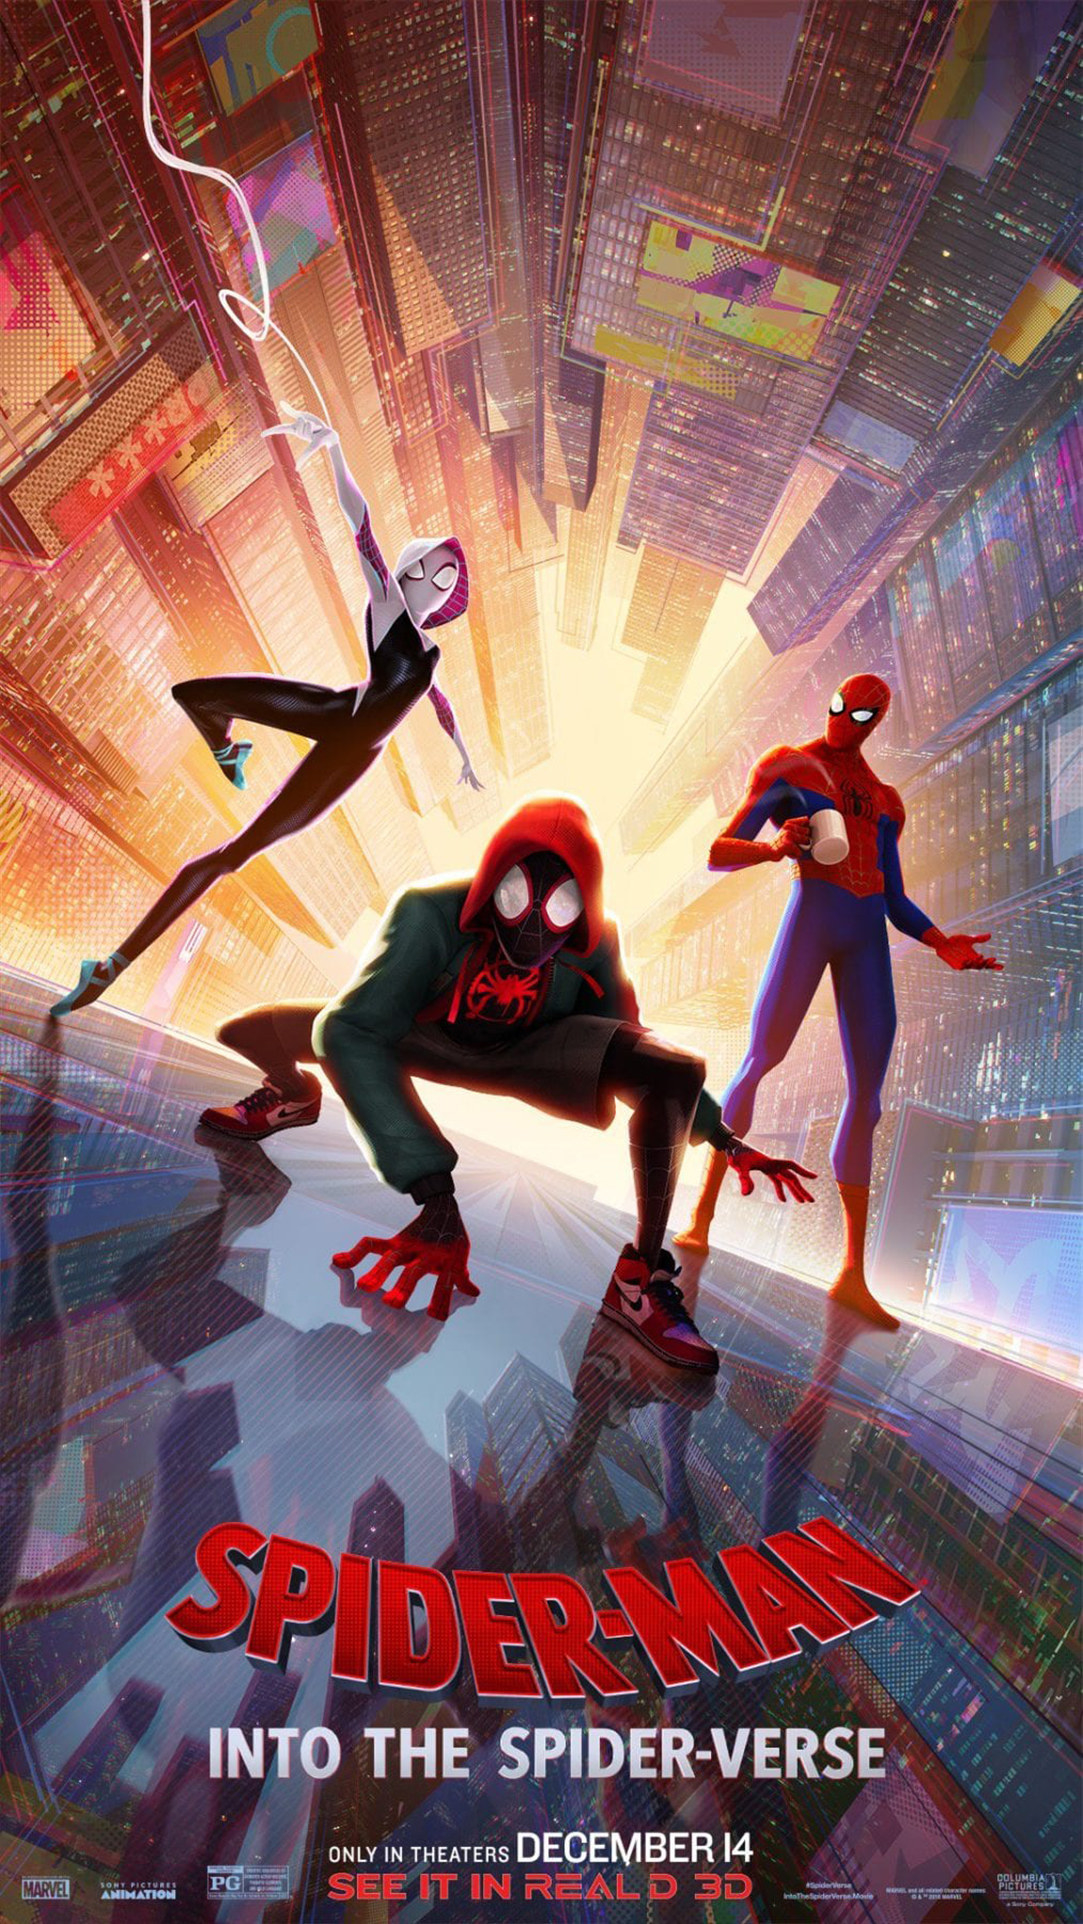 The poster, with three alternative Spider-Mans